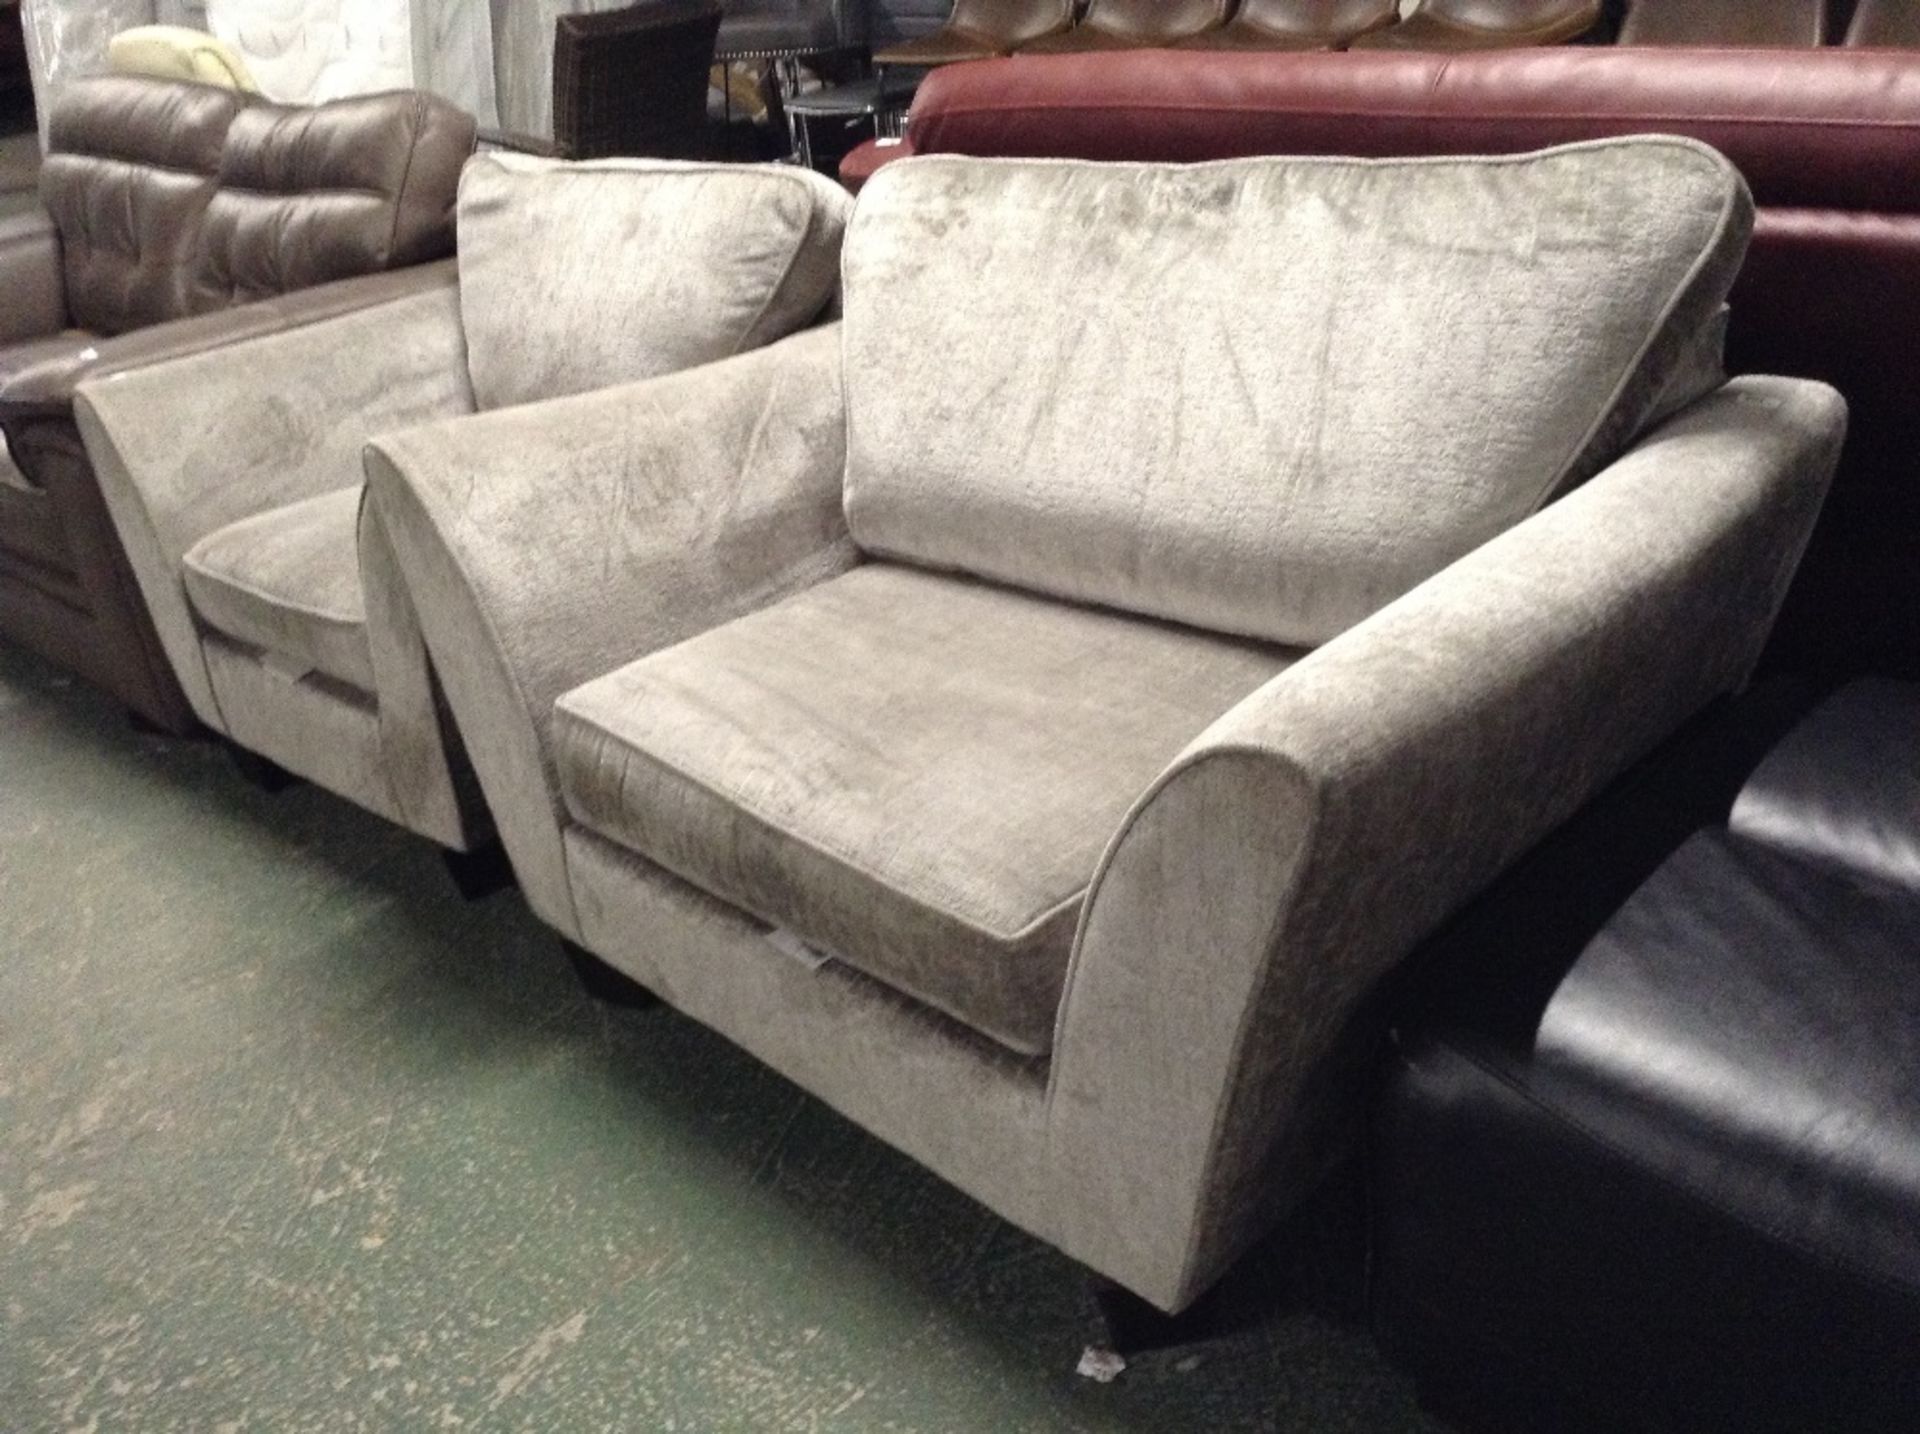 GREY FABRIC SNUG CHAIR AND CHAIR (DIRTY WORN) (HH1